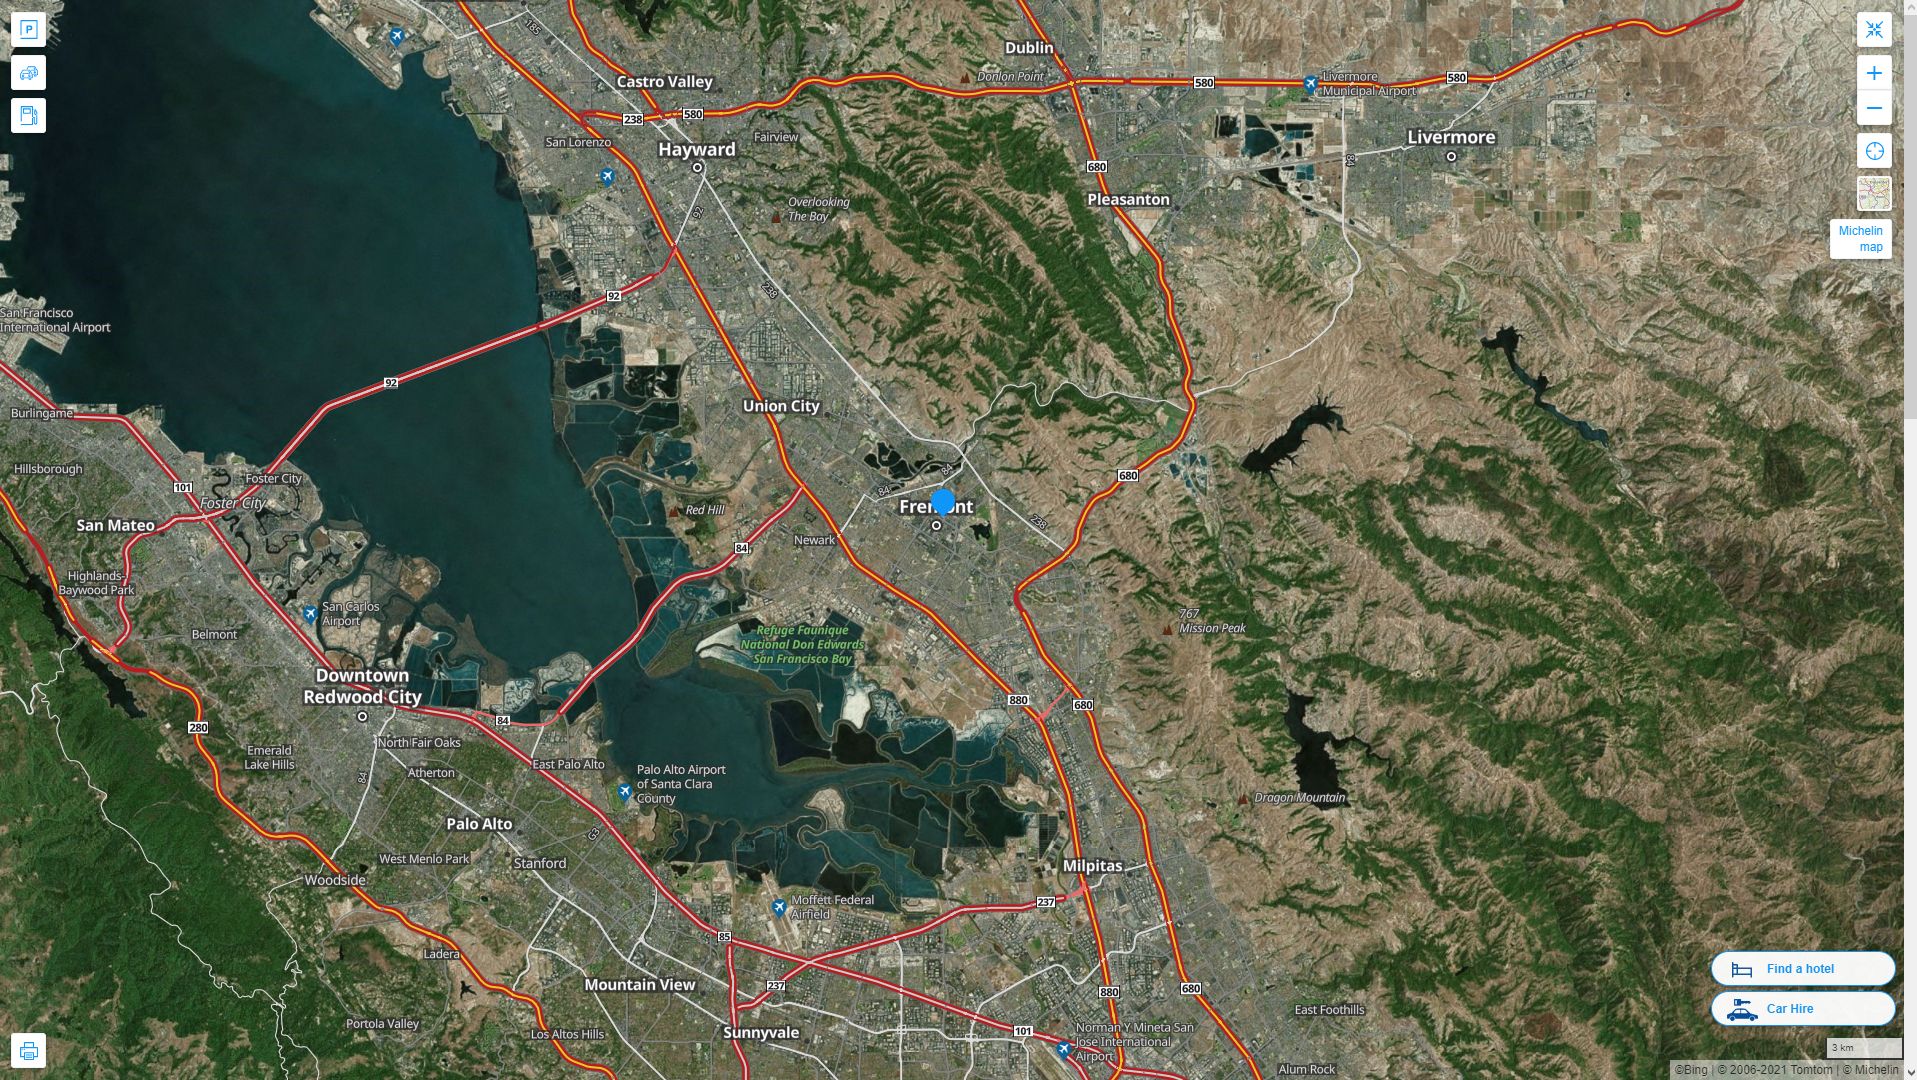 Fremont California Highway and Road Map with Satellite View